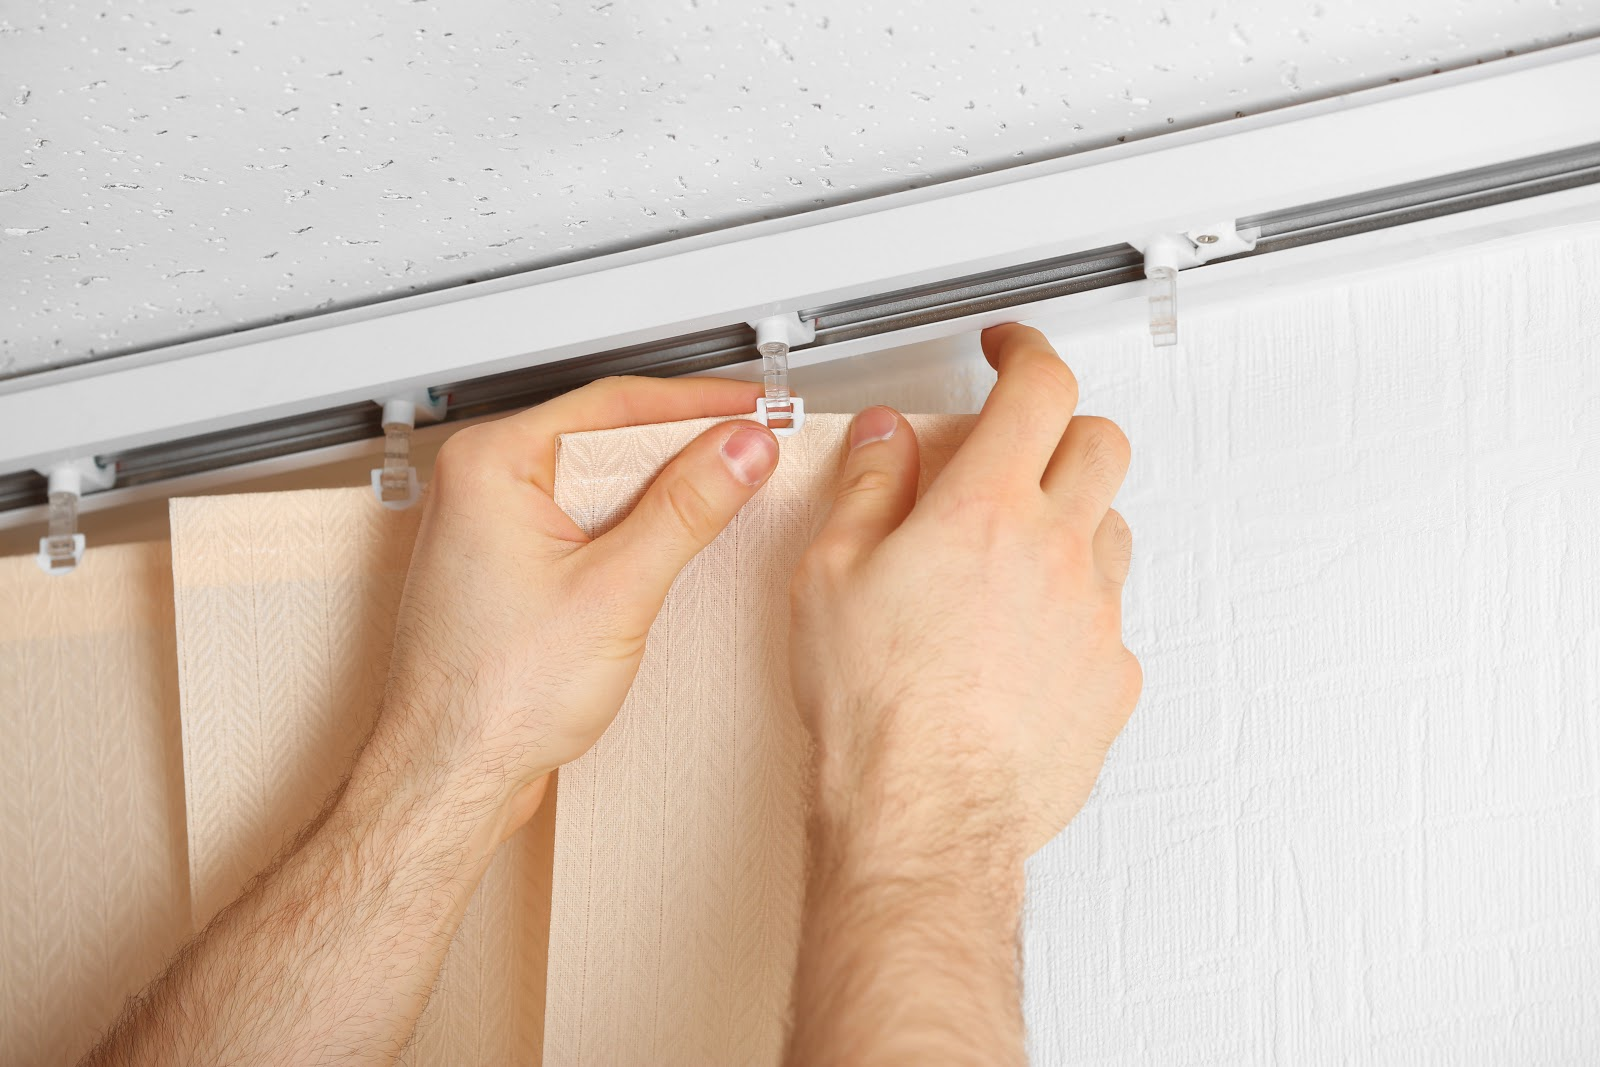 After washing blinds, lay them in a flat surface and attach them back to the headrail when they're completely dry